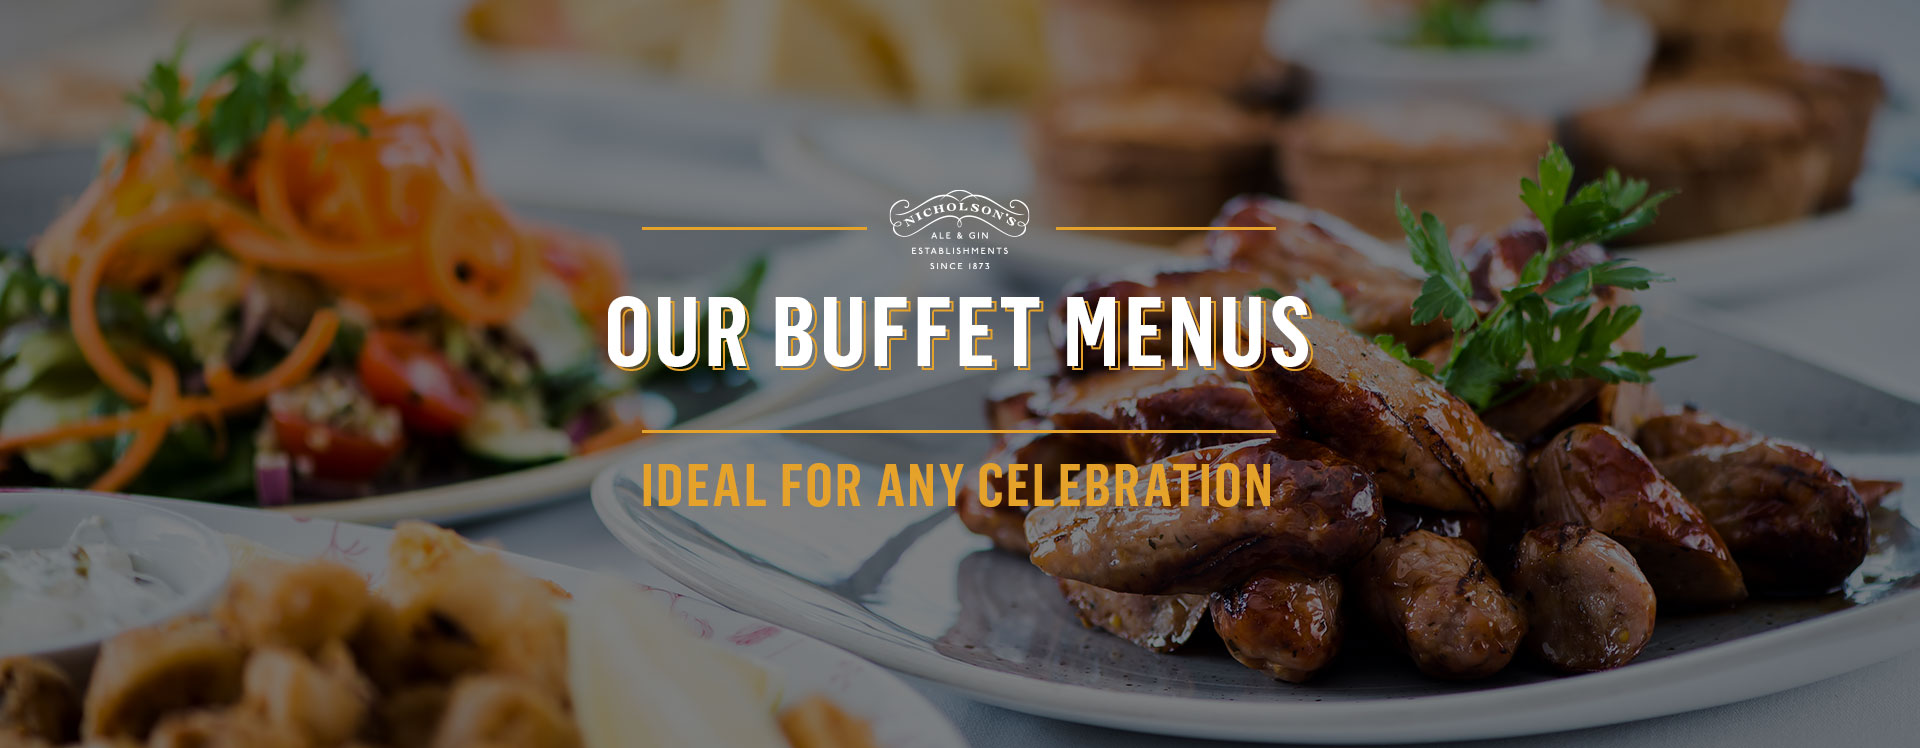 Buffet menu at The Old Buttermarket - Book a table